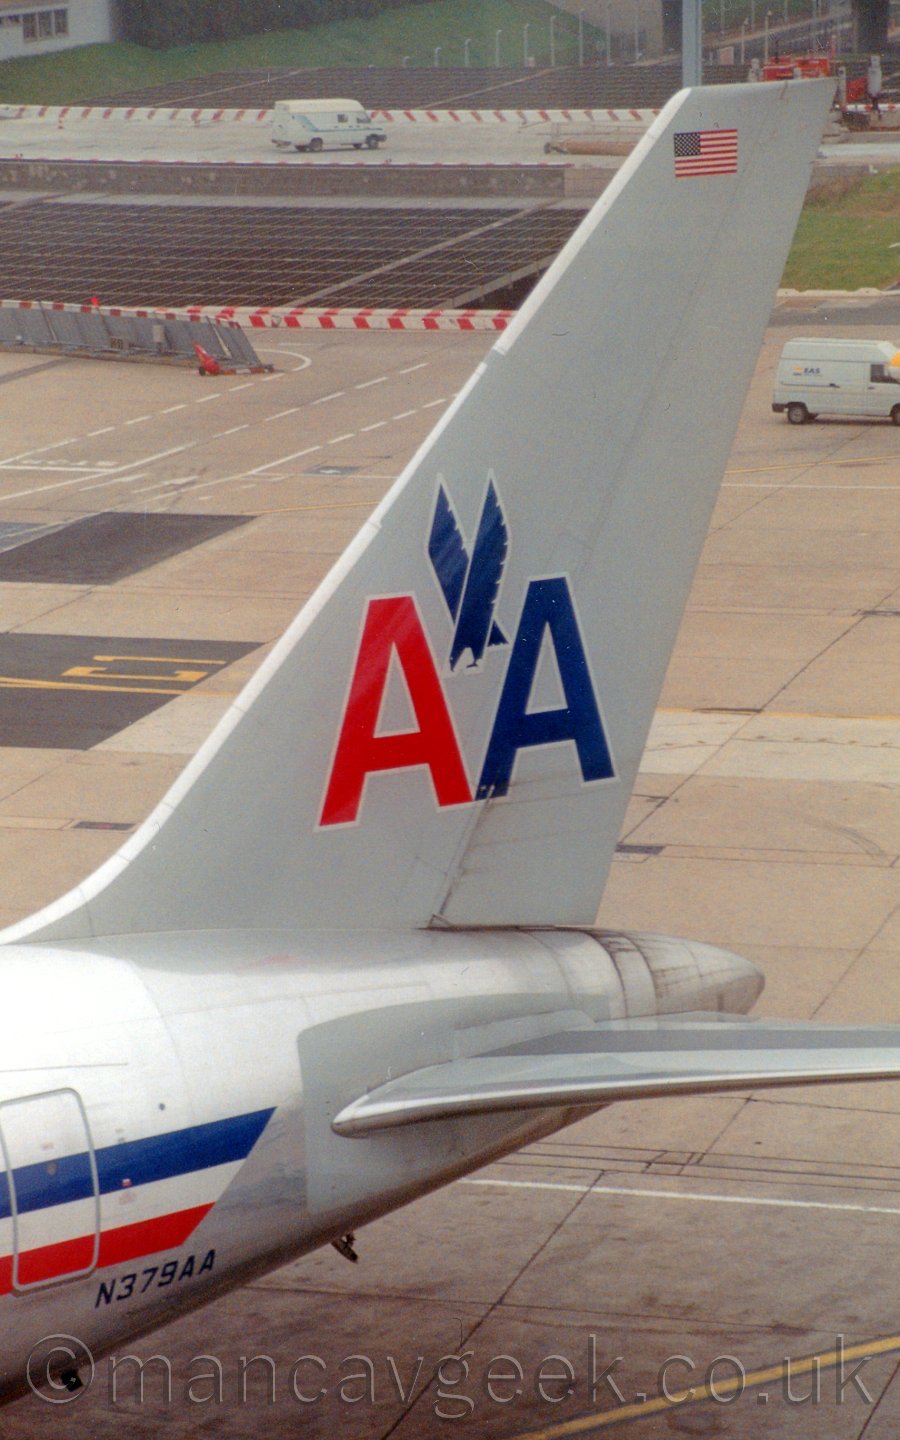 Closeup of the tail of a jet airliner parked facing to the right and angled slightly towards the camera. The plane is mostly grey, with a silver belly, and a blue, white, and red stripe running along the body. There are a pair of capital letter "A"s on the tail, one red, one blue, with a stylised image of a blue stooping eagle between them. In the background, taxiway fills most of the frame, with a metal mesh covering a road tunnel under the airport towards the top of the frame.